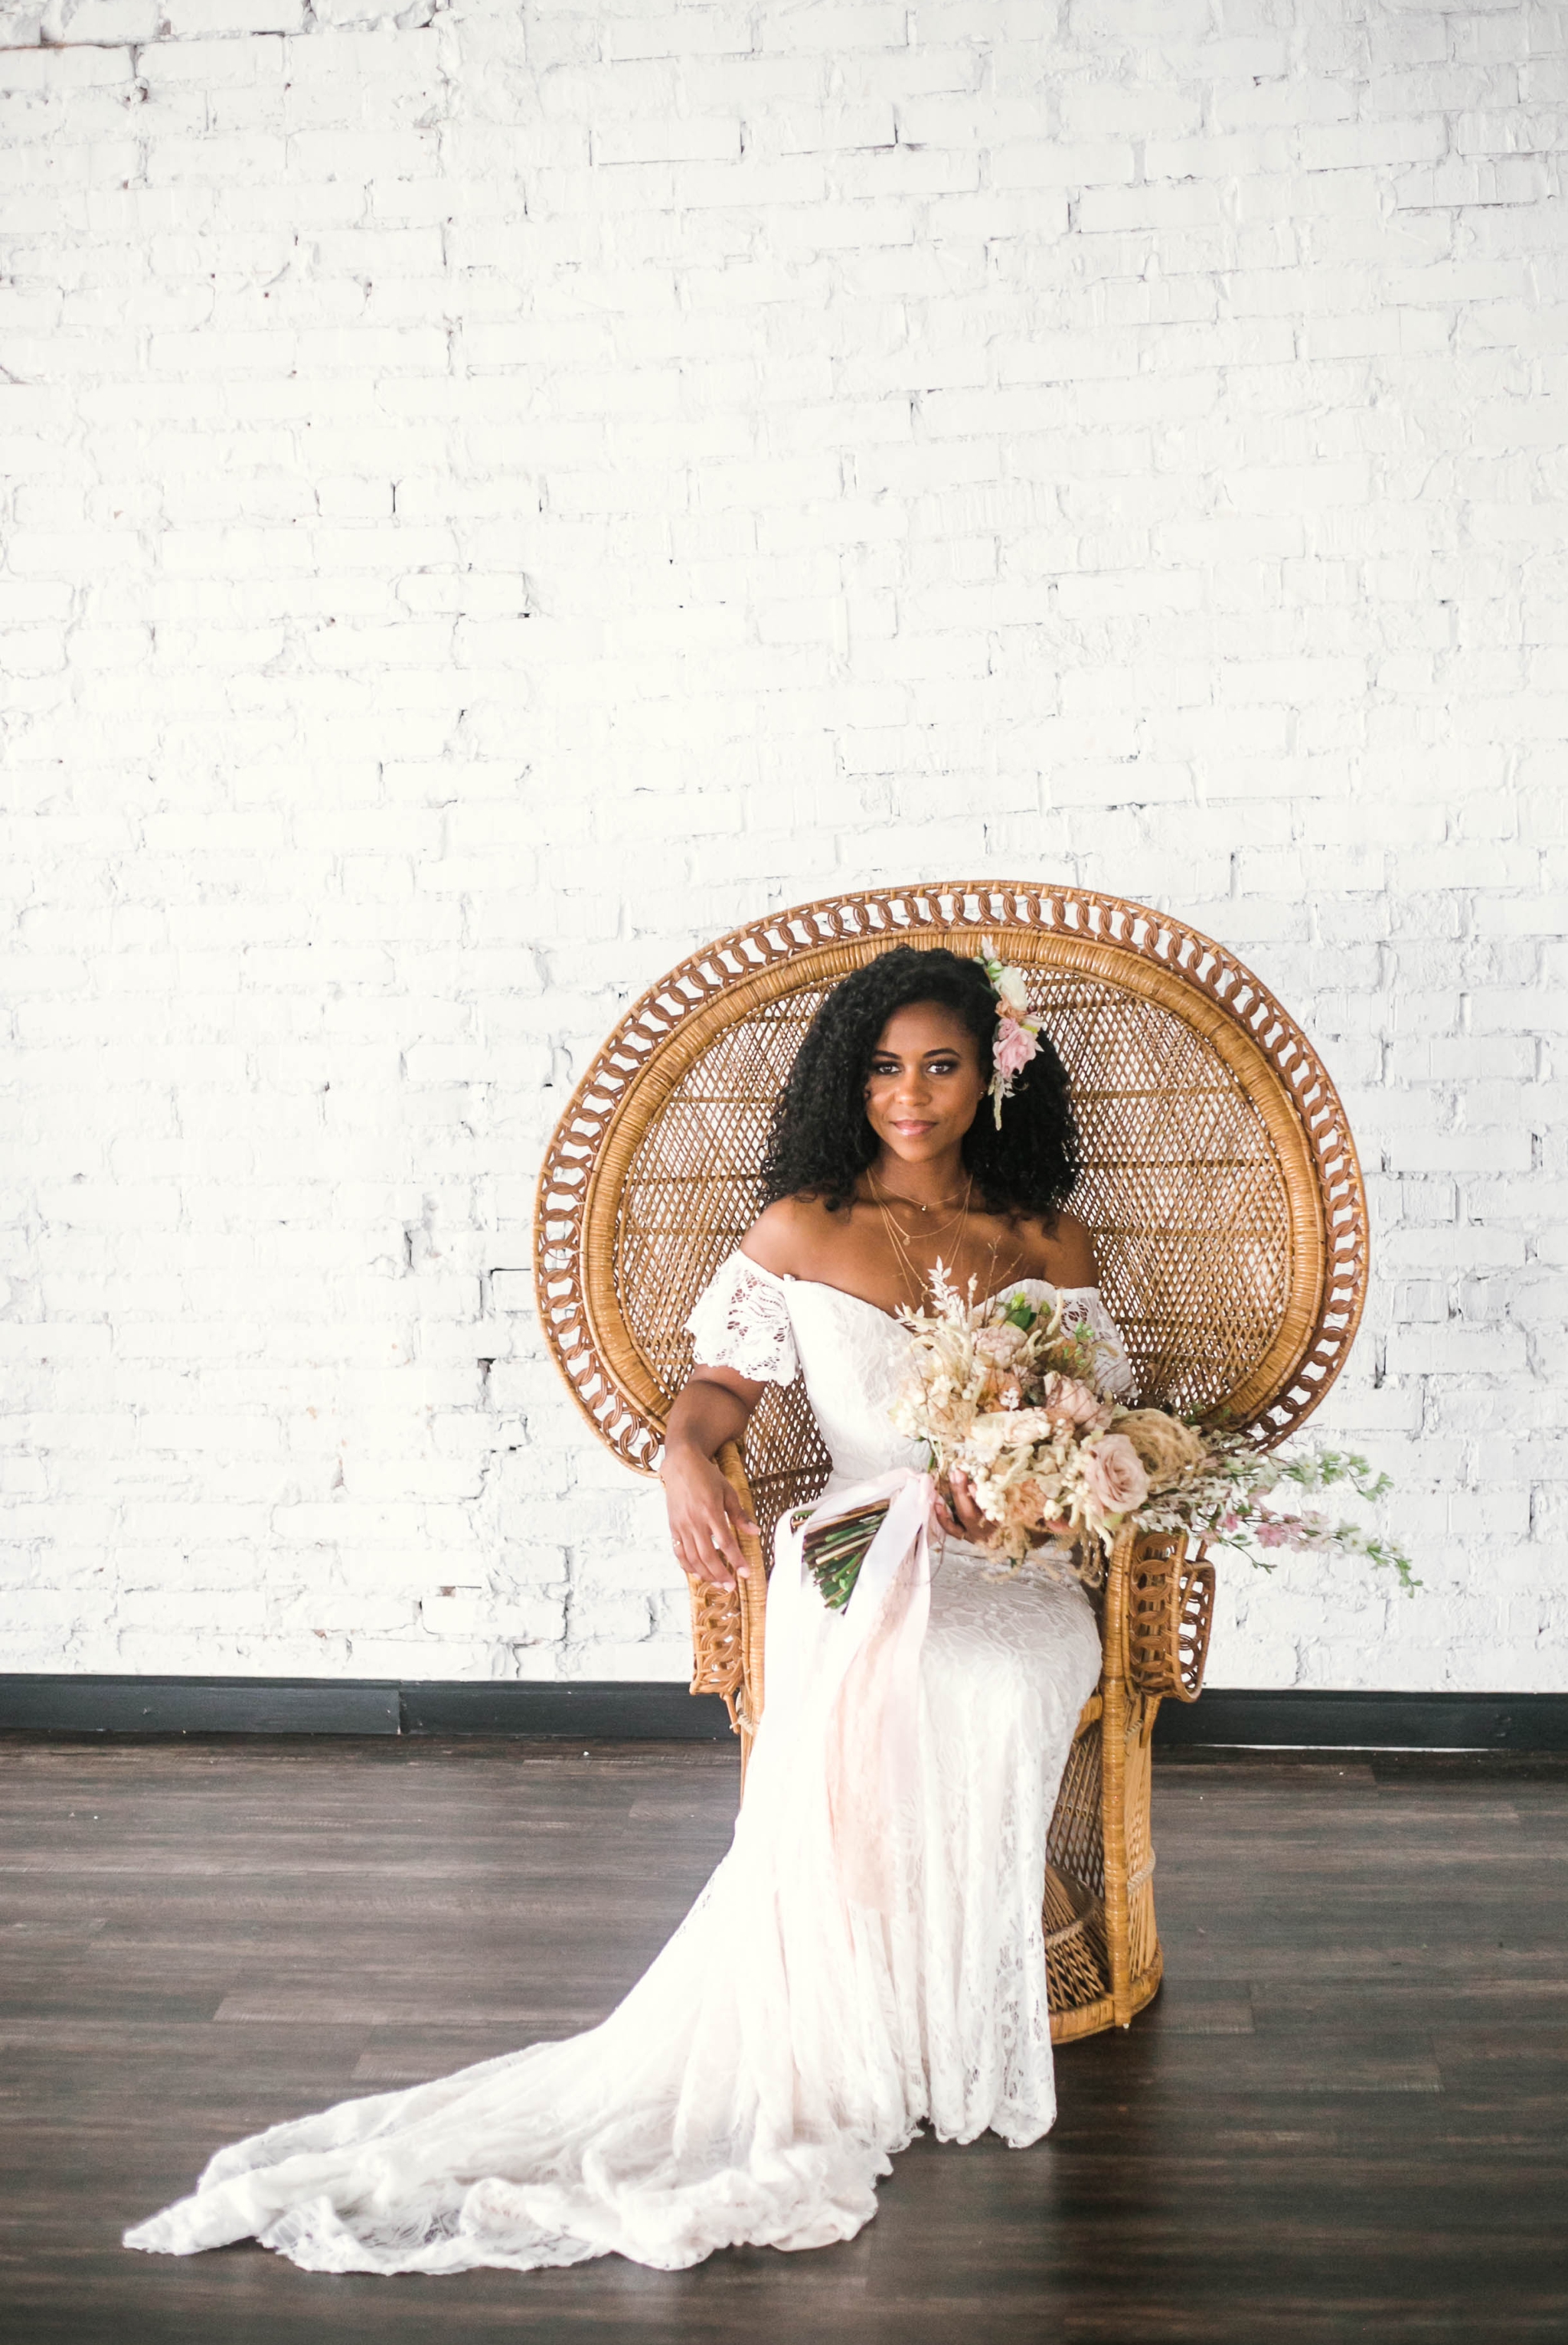  Indoor Wedding Portraits, shot with natural light - black love - african american bride sitting in a Midcentury Woven Wicker Peacock Chair in a boho wedding dress with a big bouquet  - tropical inspiration - honolulu, oahu, hawaii photographer 